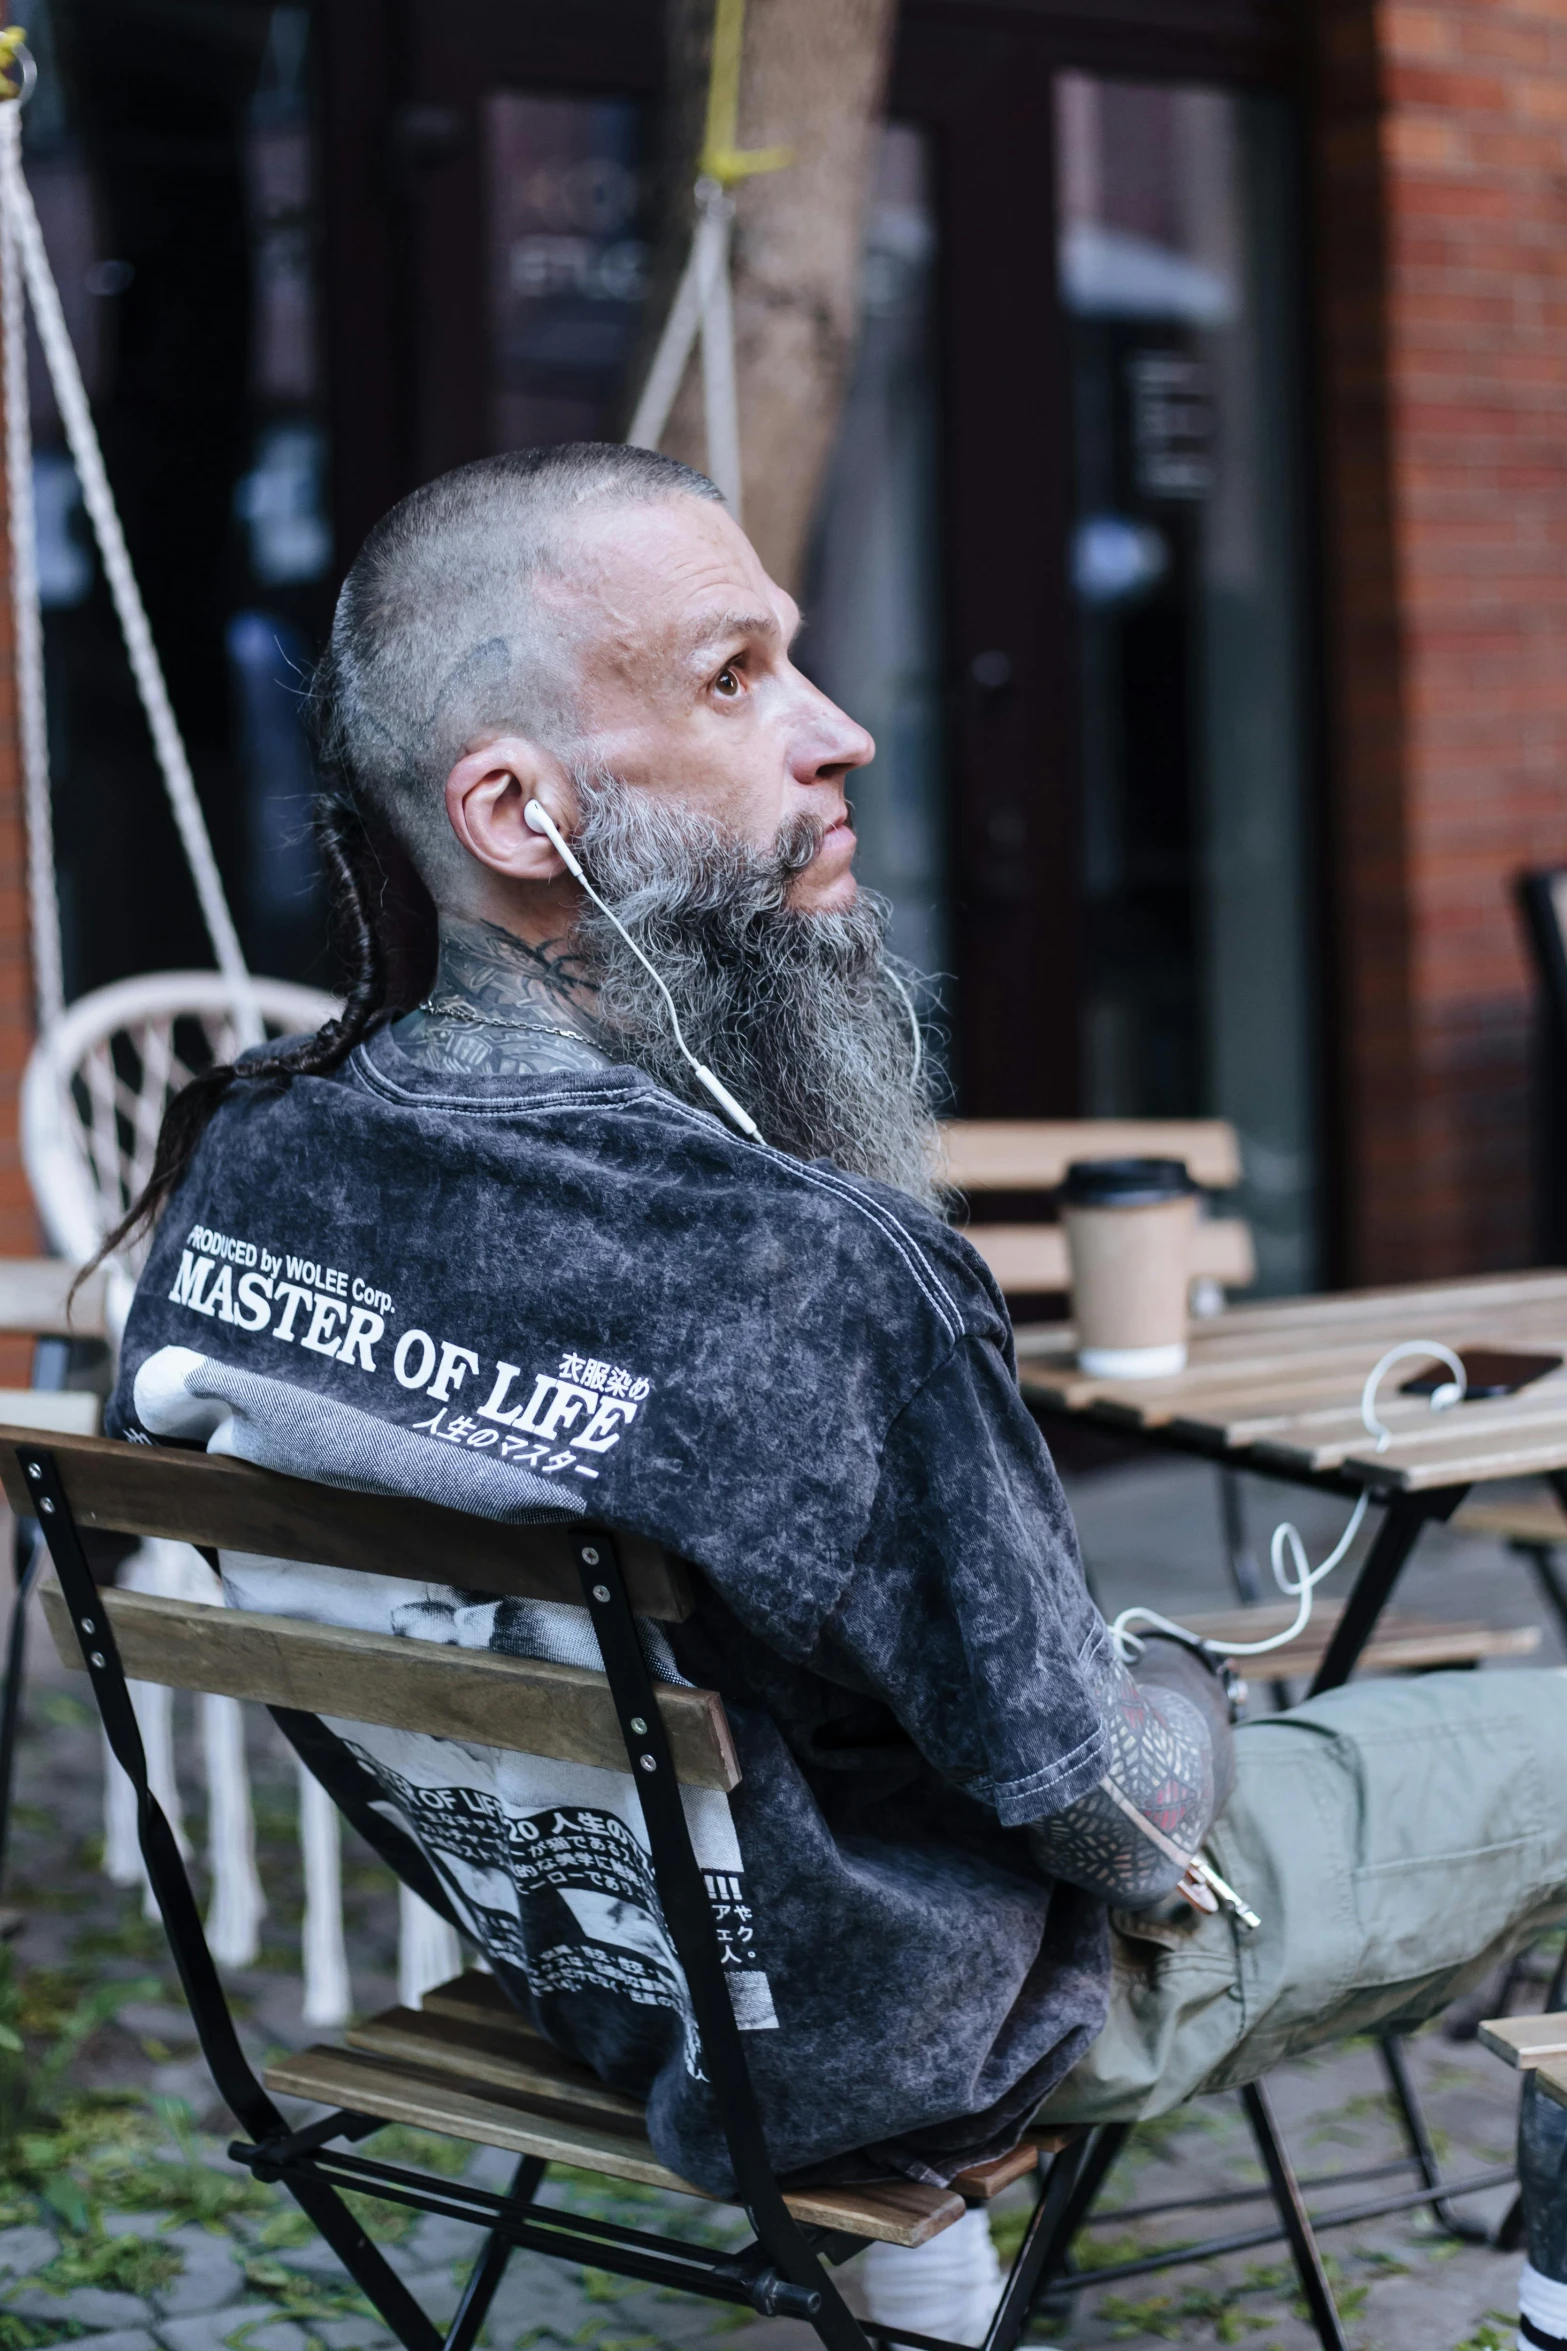 a man with a beard sitting in an outdoor chair